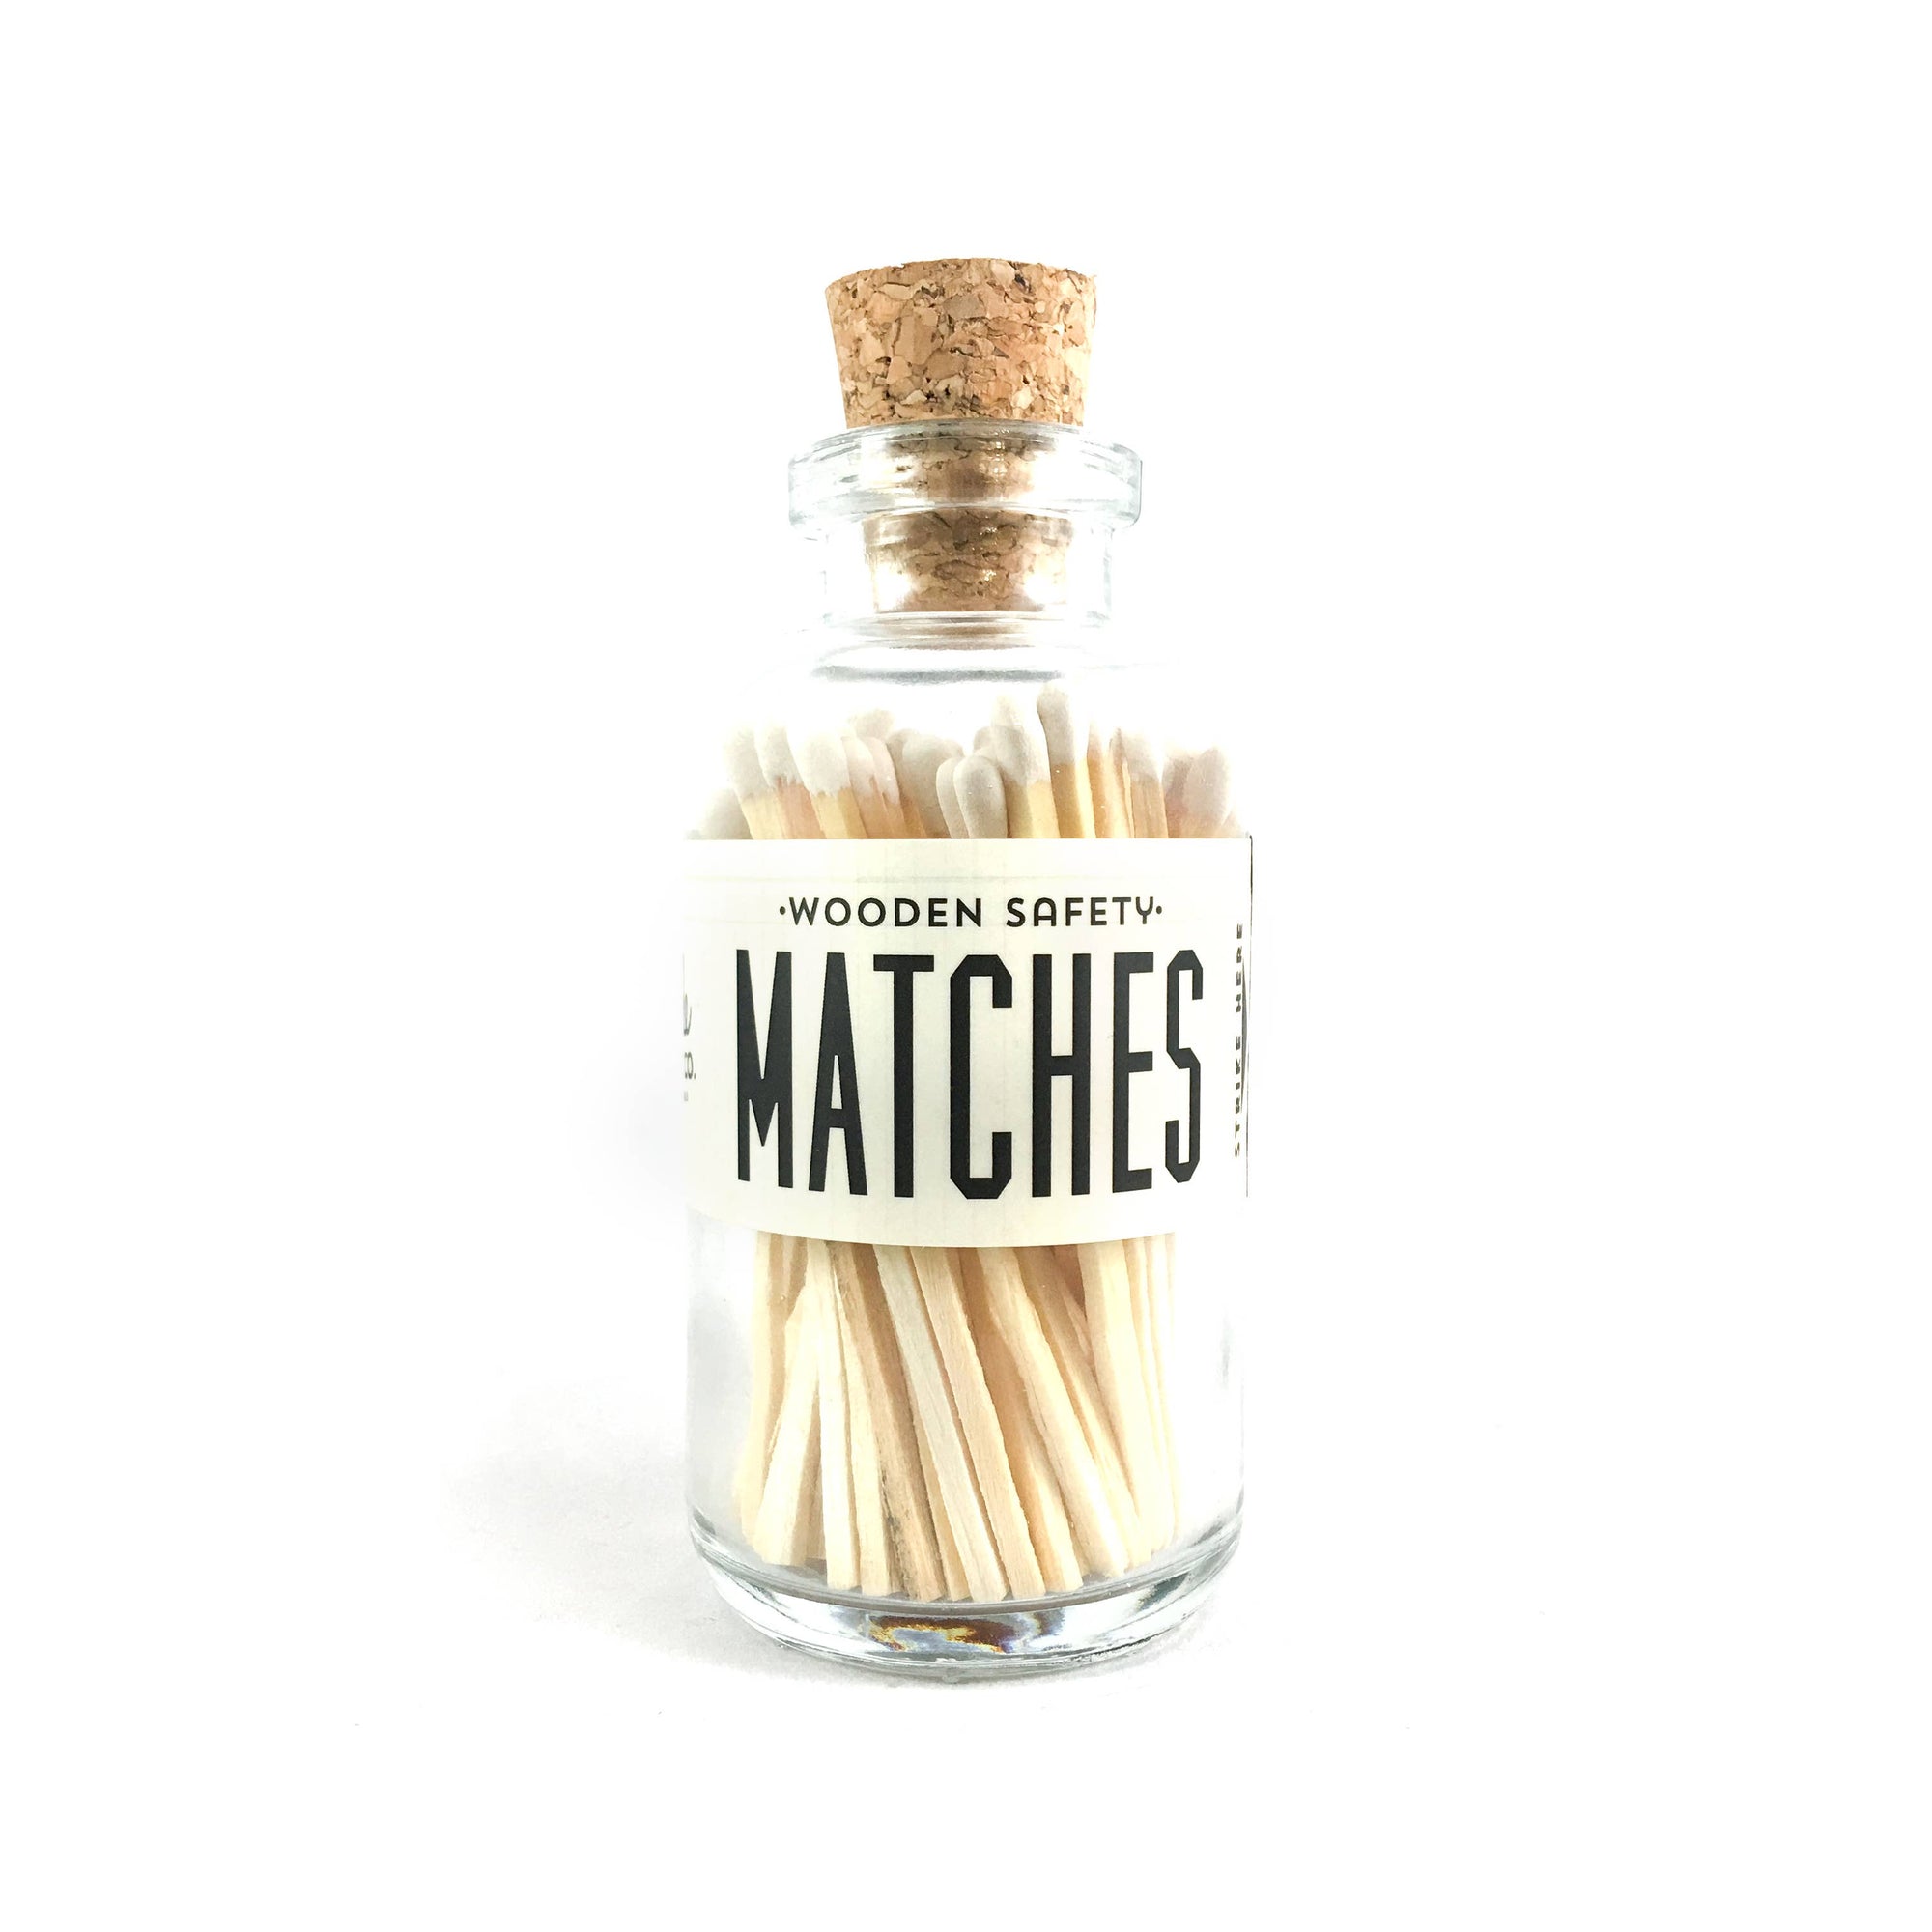 Wooden Safety Matches by Made Market Co.